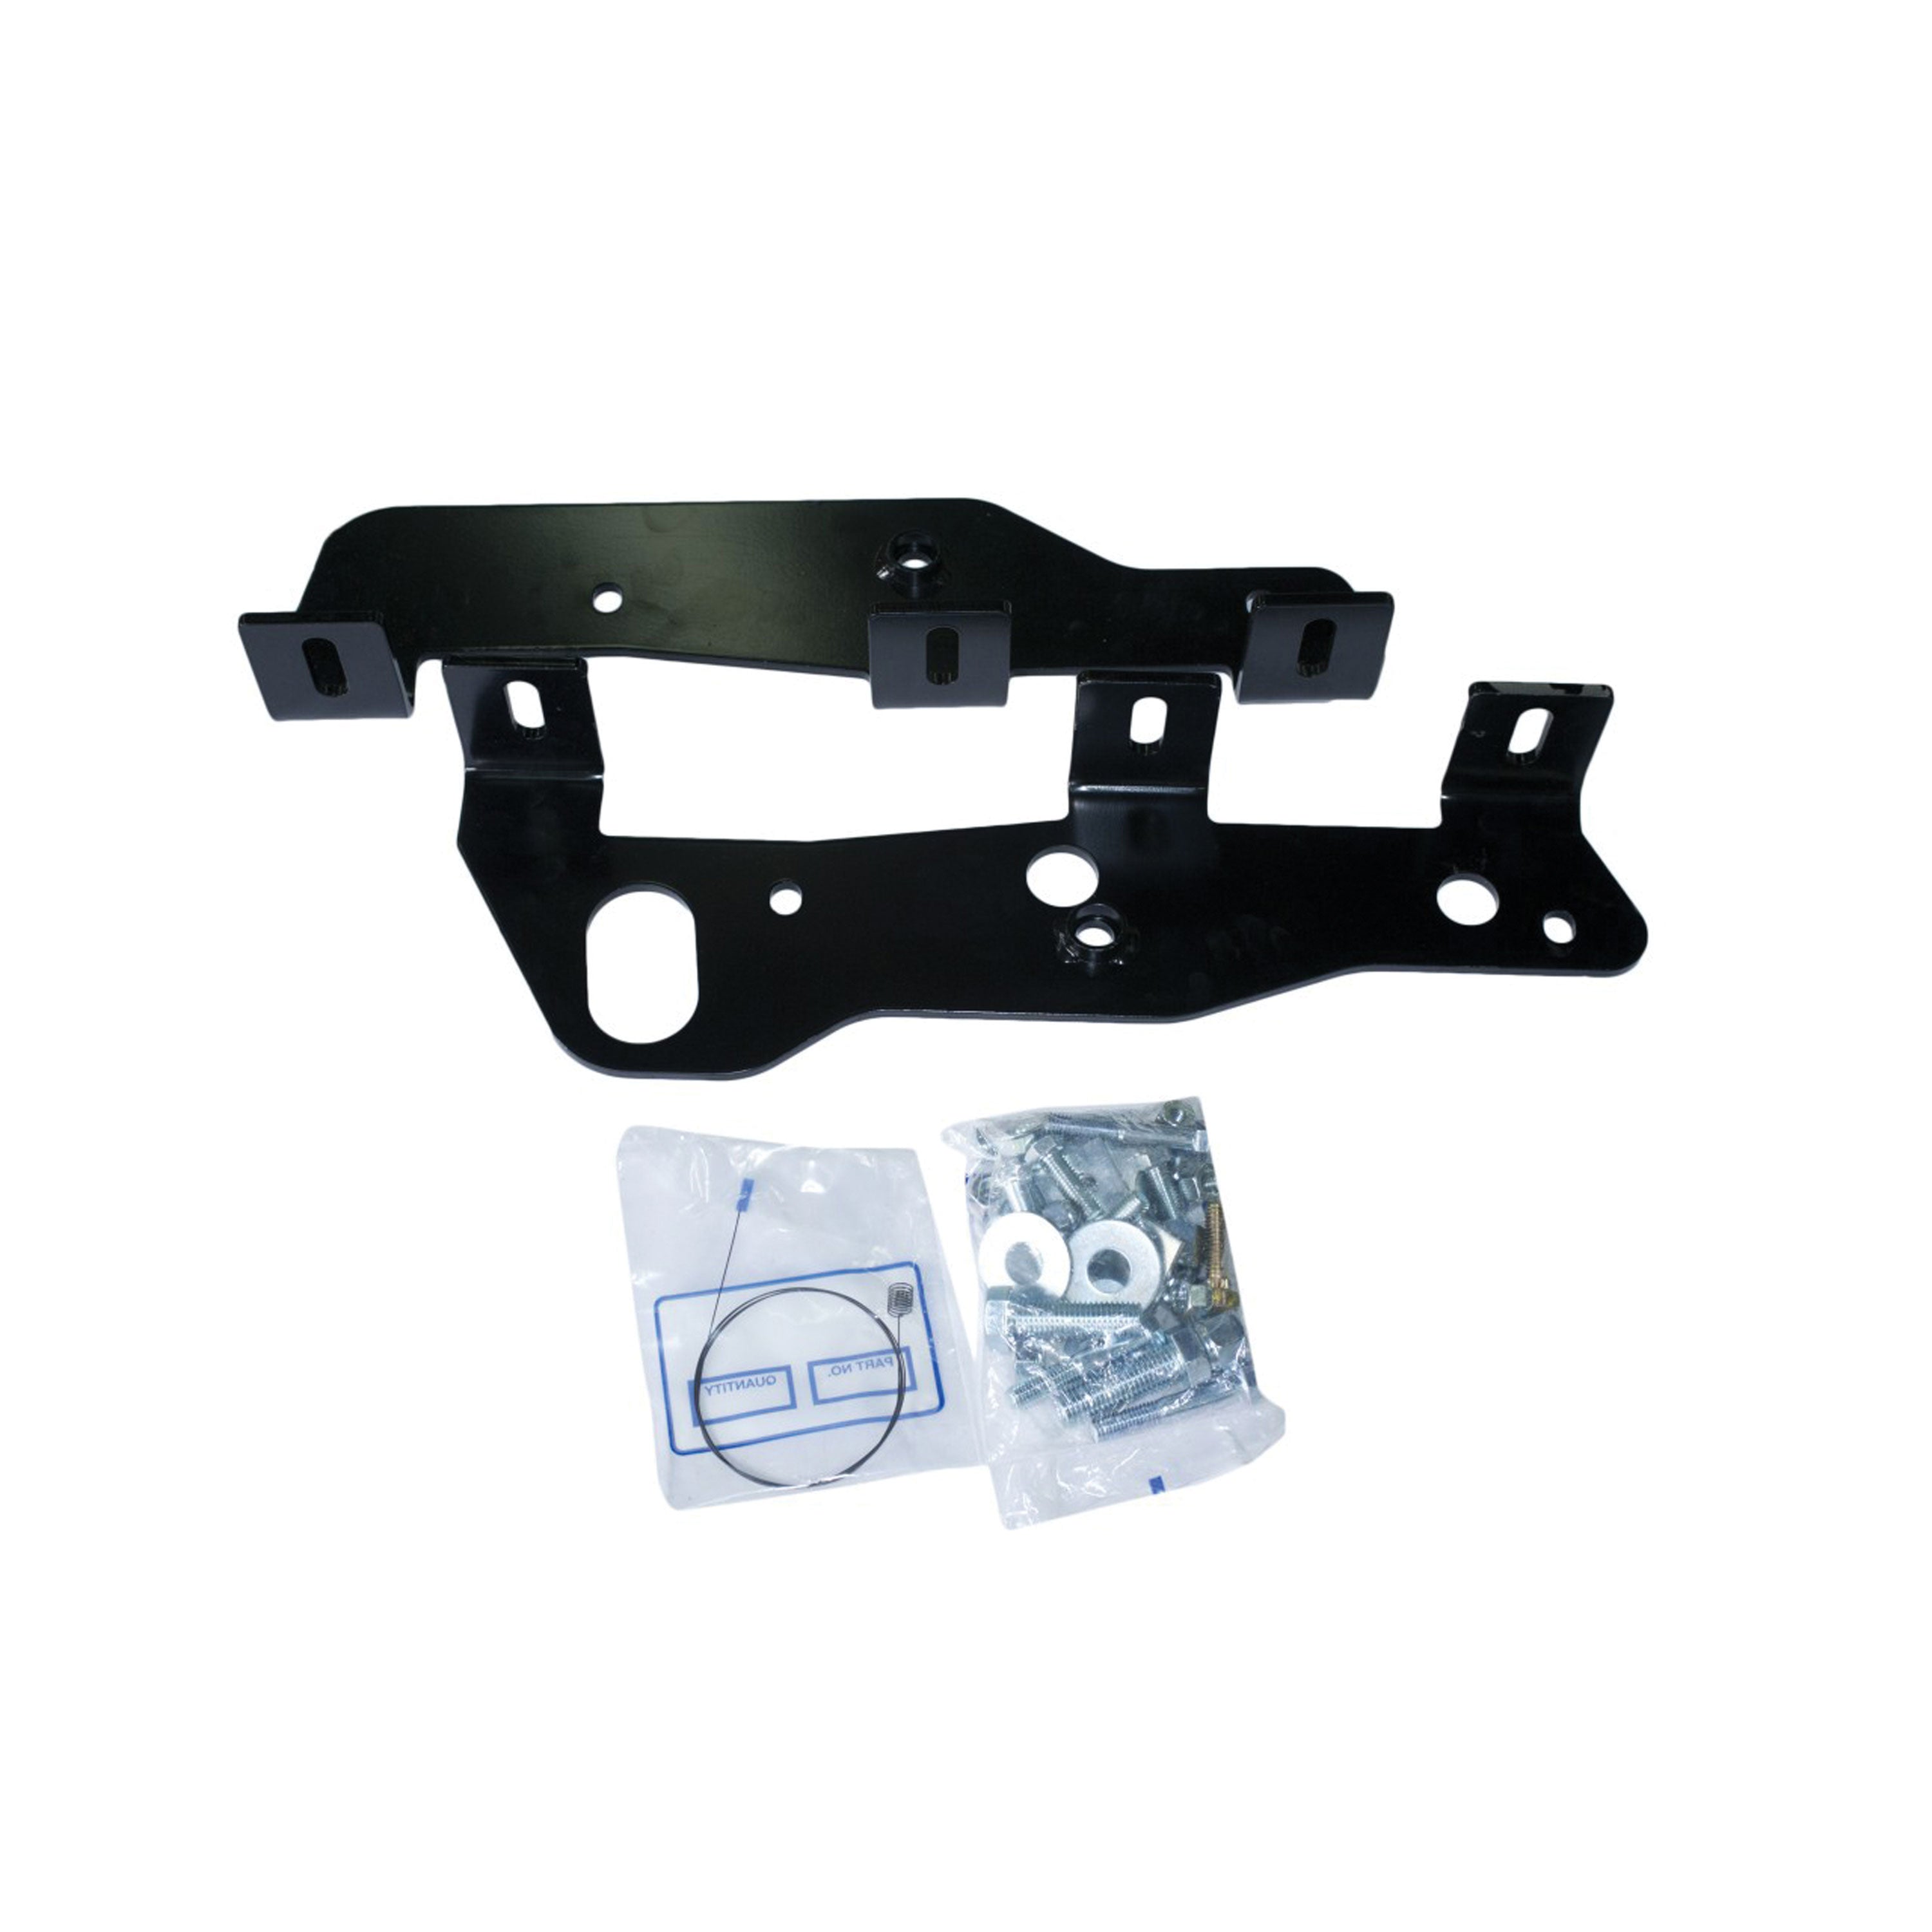 Demco 8553000 Hijacker SL-Series Frame Mounting Bracket Kit for Ford F250/F350/F450 SD '11-'16 (No Drill Attachment)